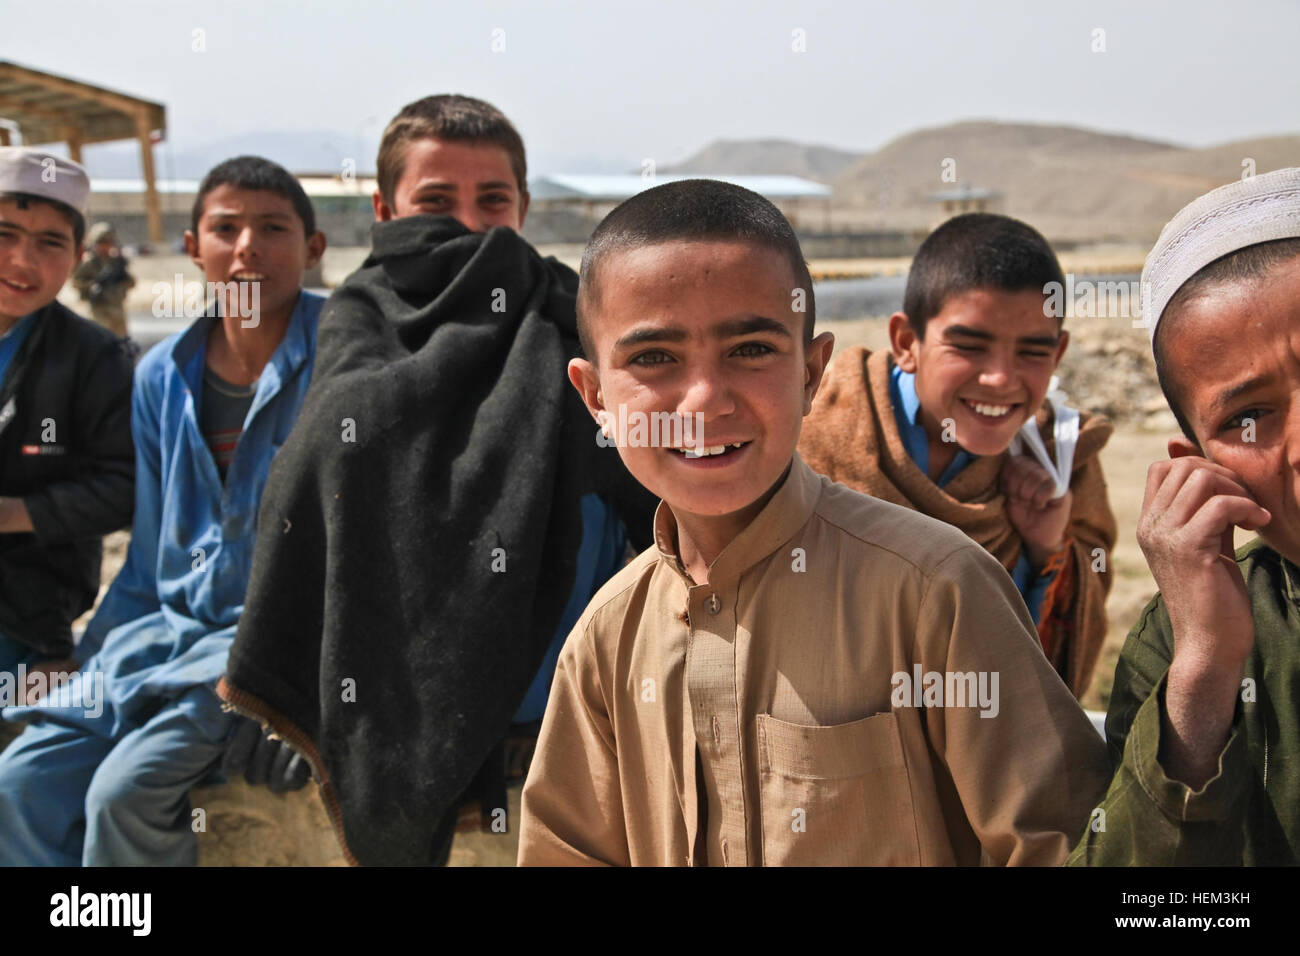 Local Afghan boys smile at U.S. soldiers in Nazyan district, Nangarhar province, Afghanistan, March 15, 2012. The purpose of the mission was to gain familiarization of the district and key leadership. Key leader engagement 120315-A-LP603-130 Stock Photo